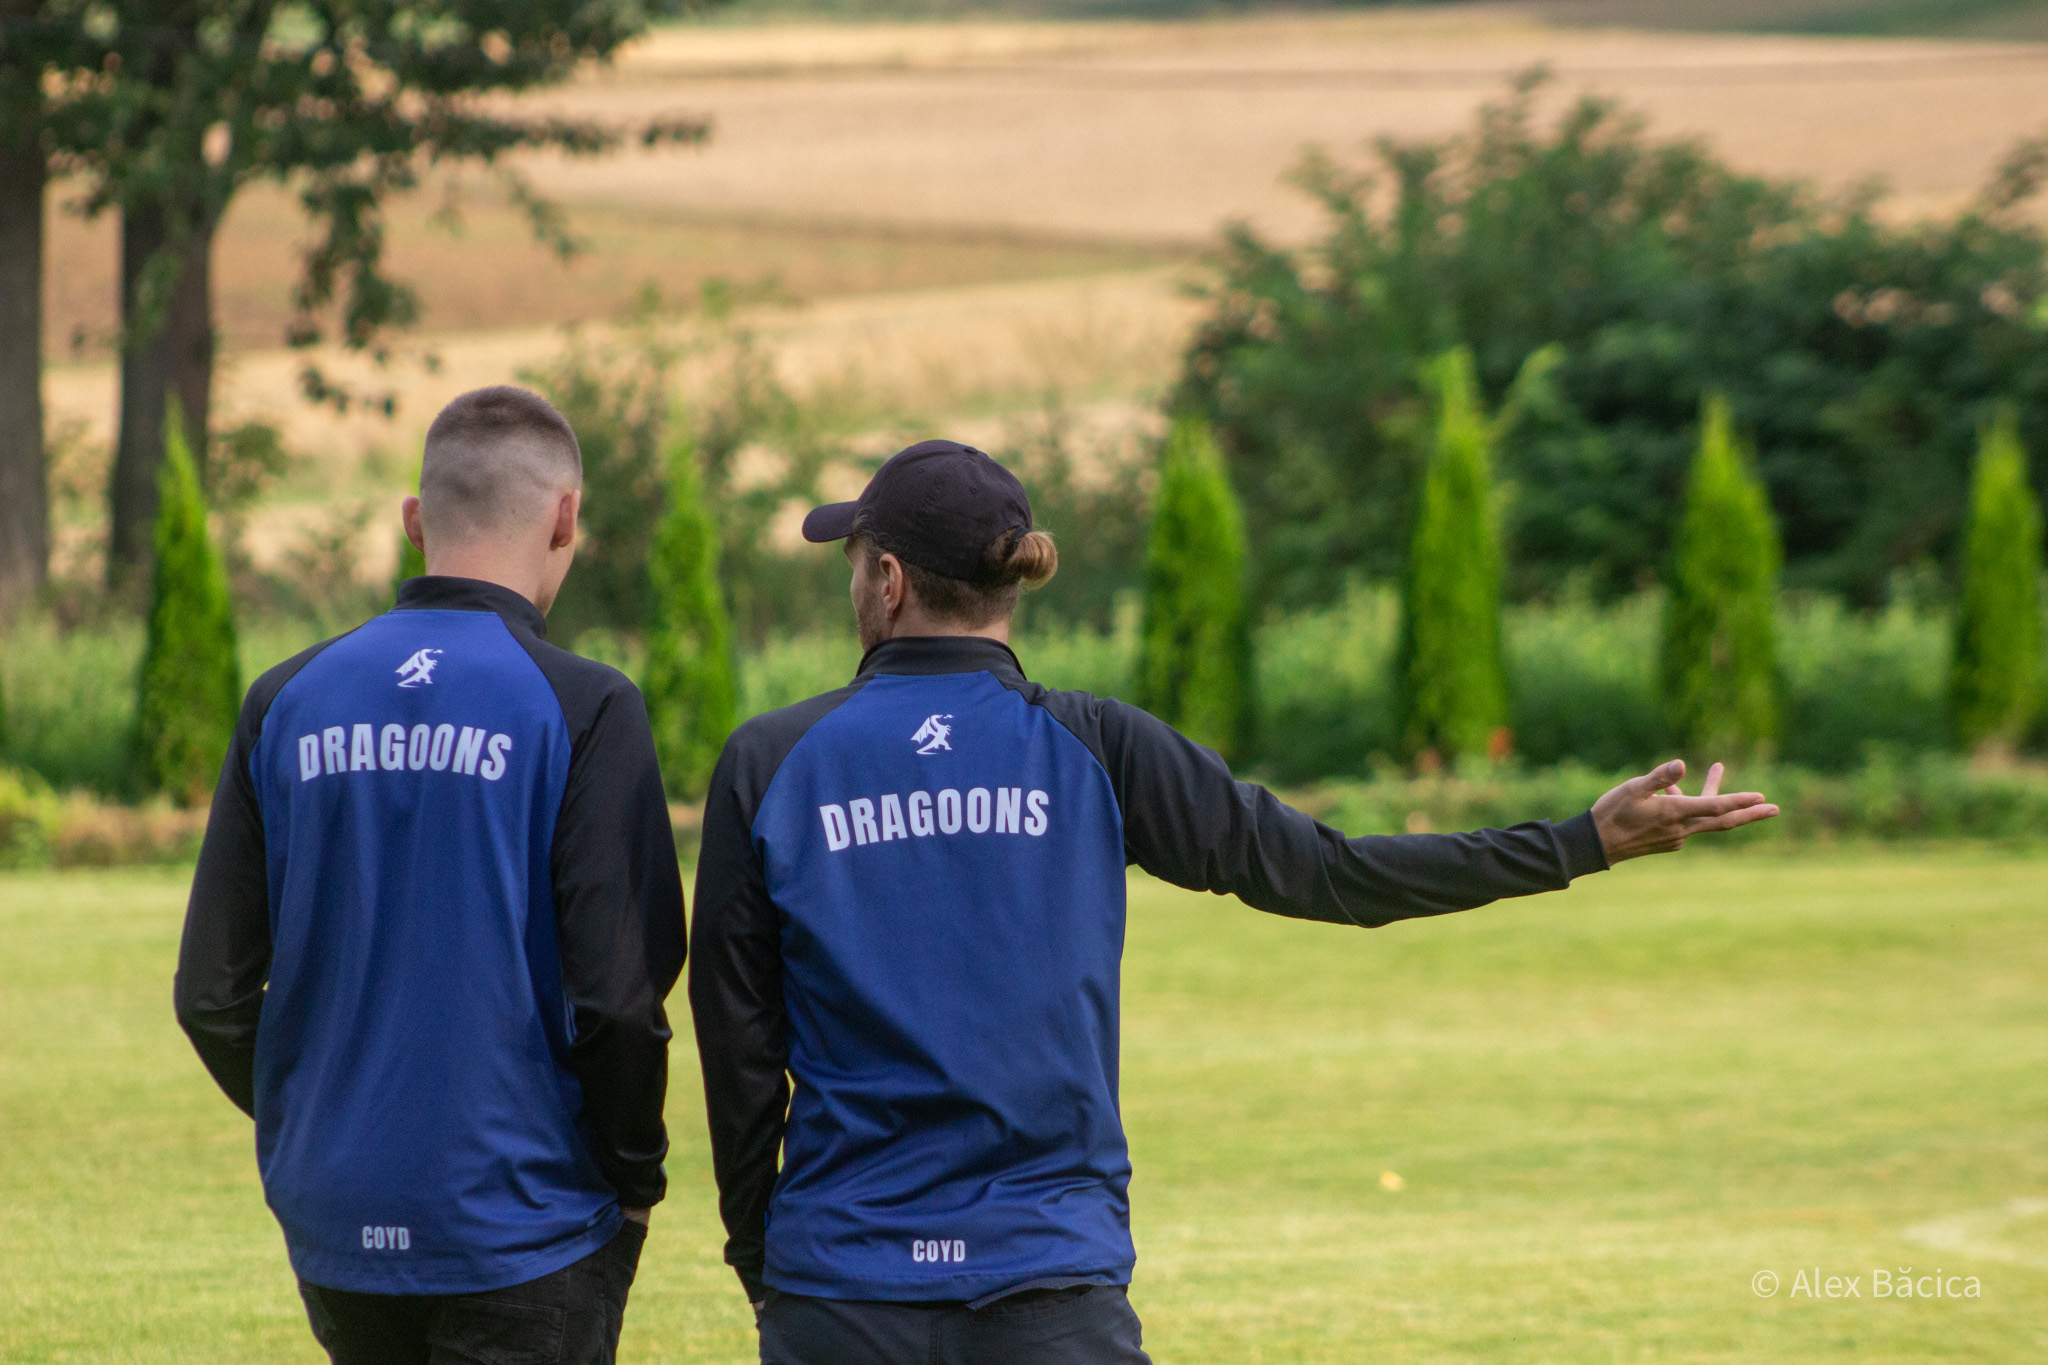 Two Krakow Dragoons FC players walking alongside on the pitch